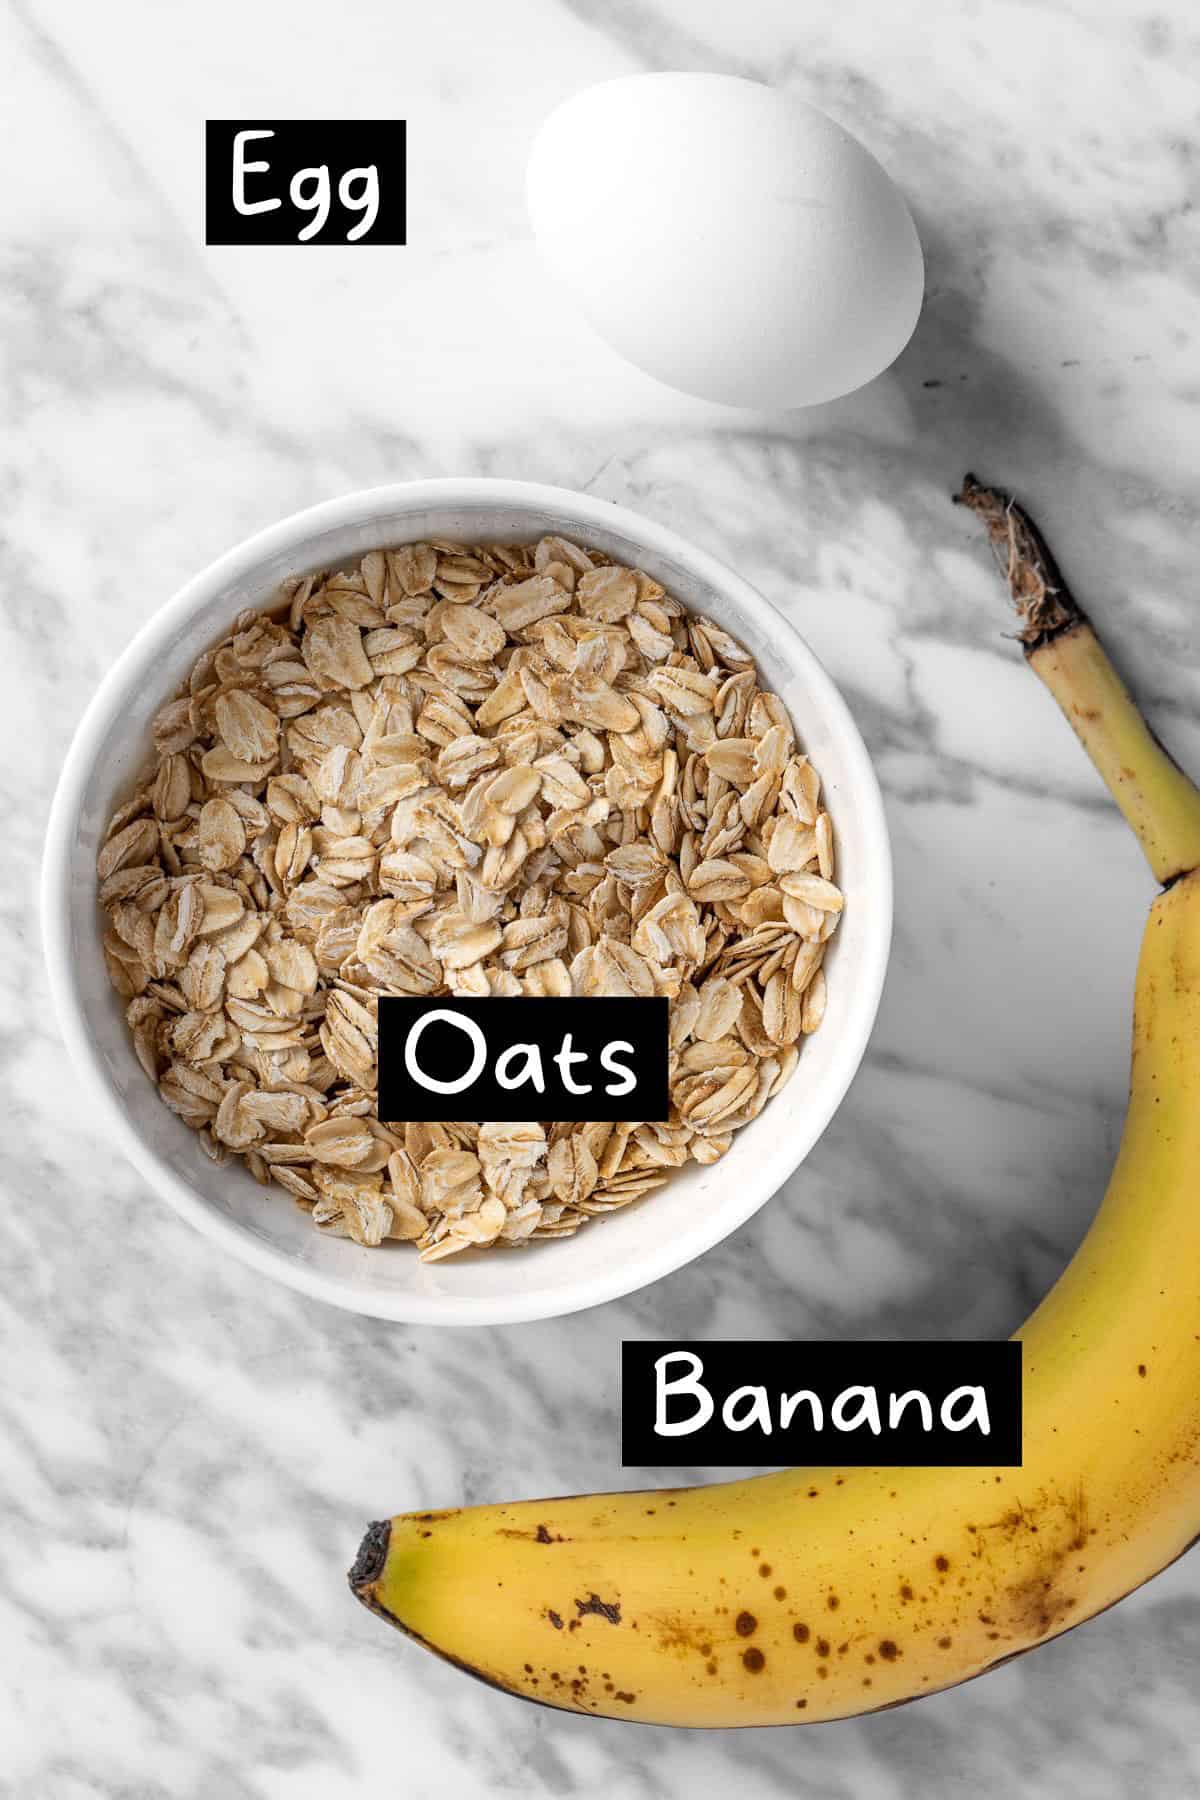 The three ingredients needed to make the pancakes: a banana, egg and oats.